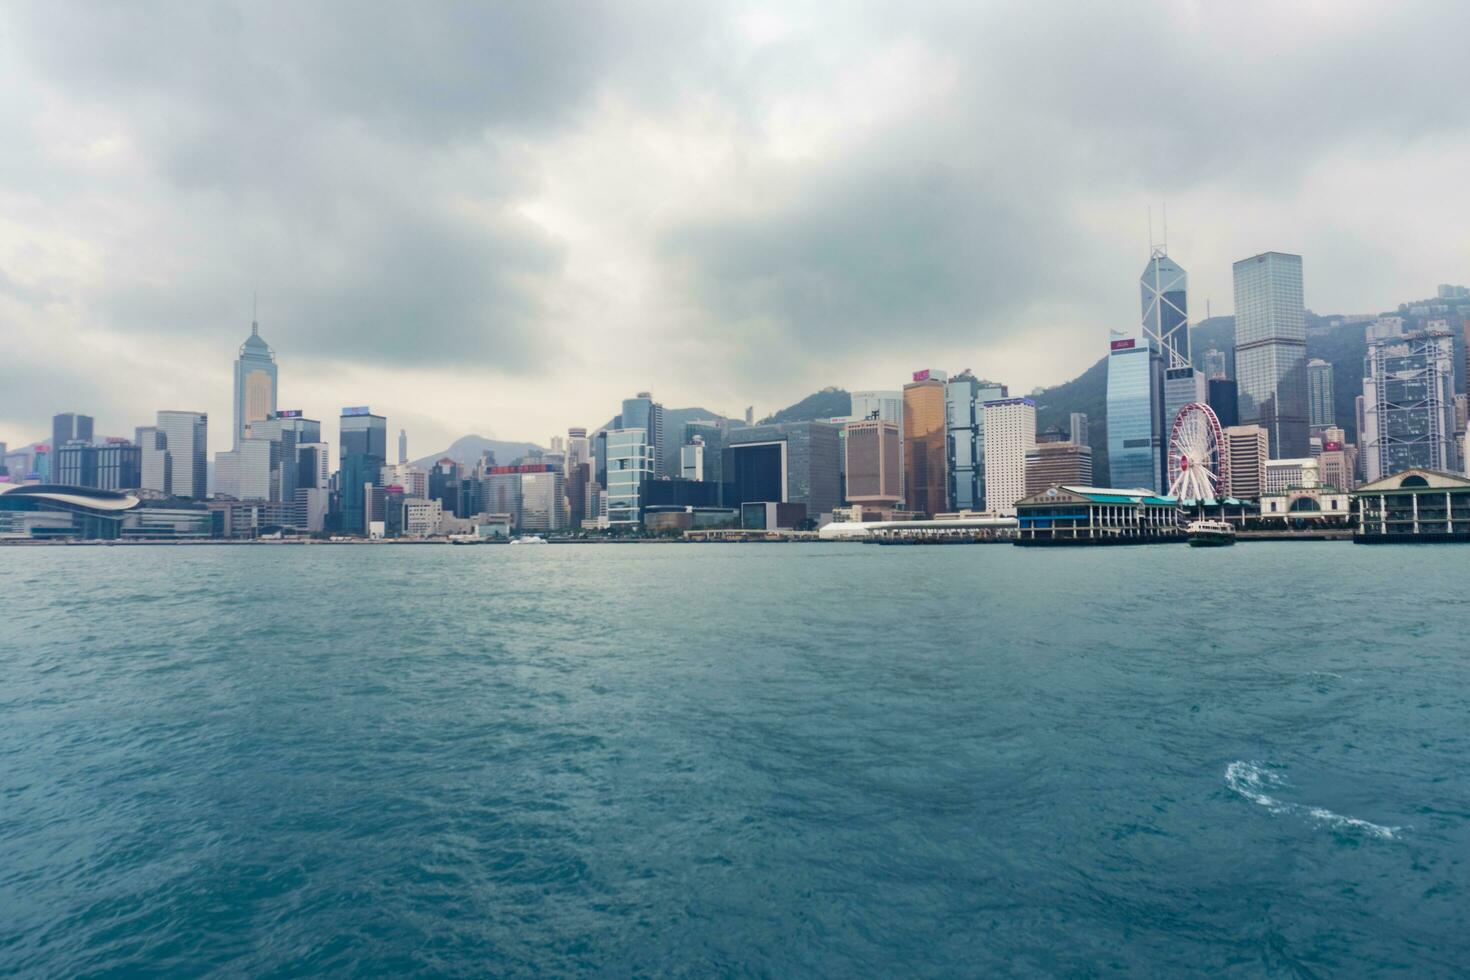 Hong Kong,March 27, 2019-View of the Hong Kong skyscrapers from the ferrie crossing the Victoria Harbour during a cloudy day photo